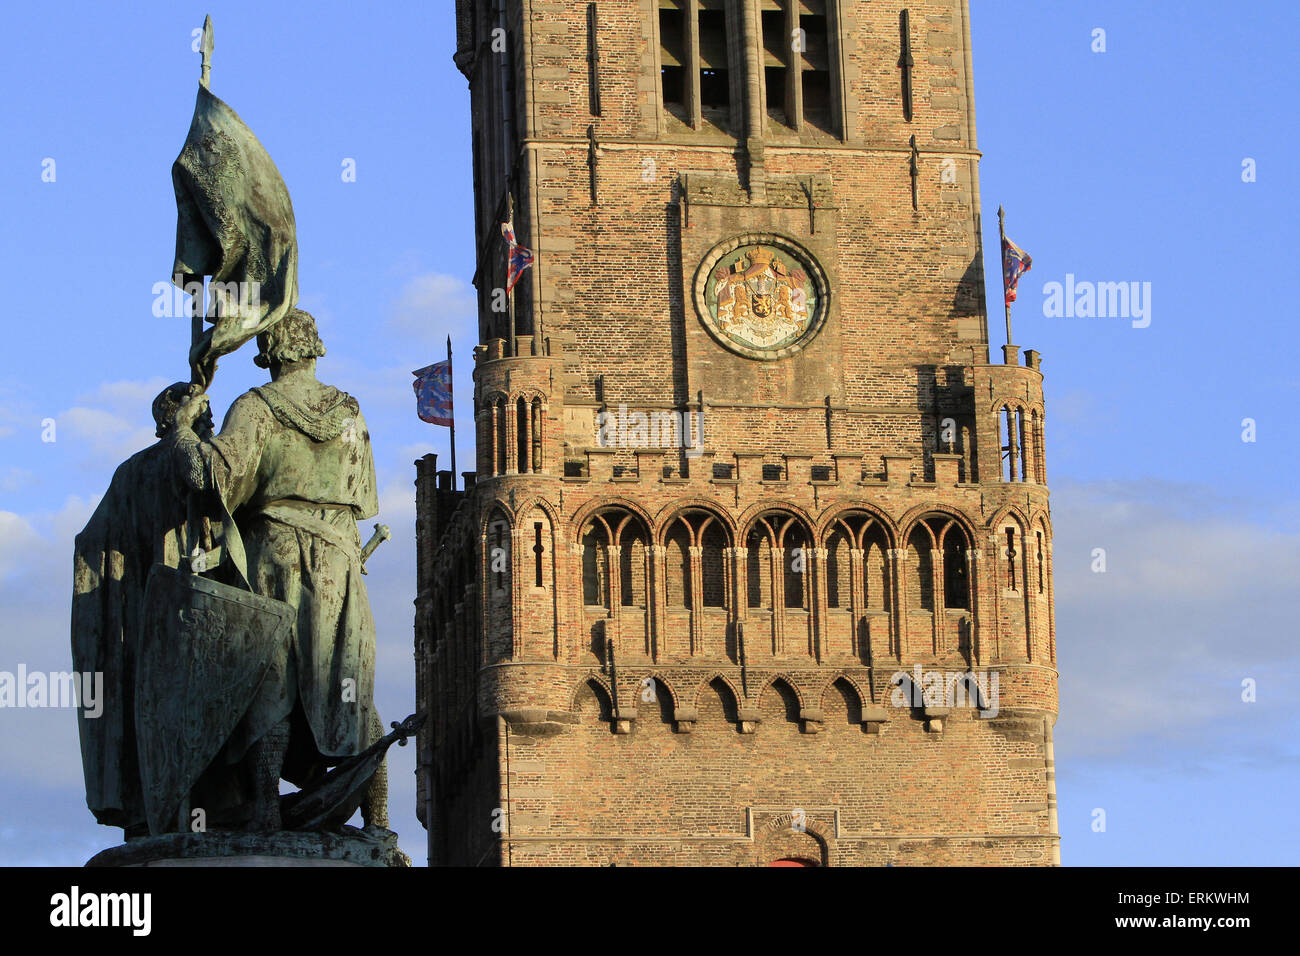 Arms, Kingdom of Belgium, Belfry of Bruges, viewed from the Grand Place, Bruges, Belgium, Europe Stock Photo